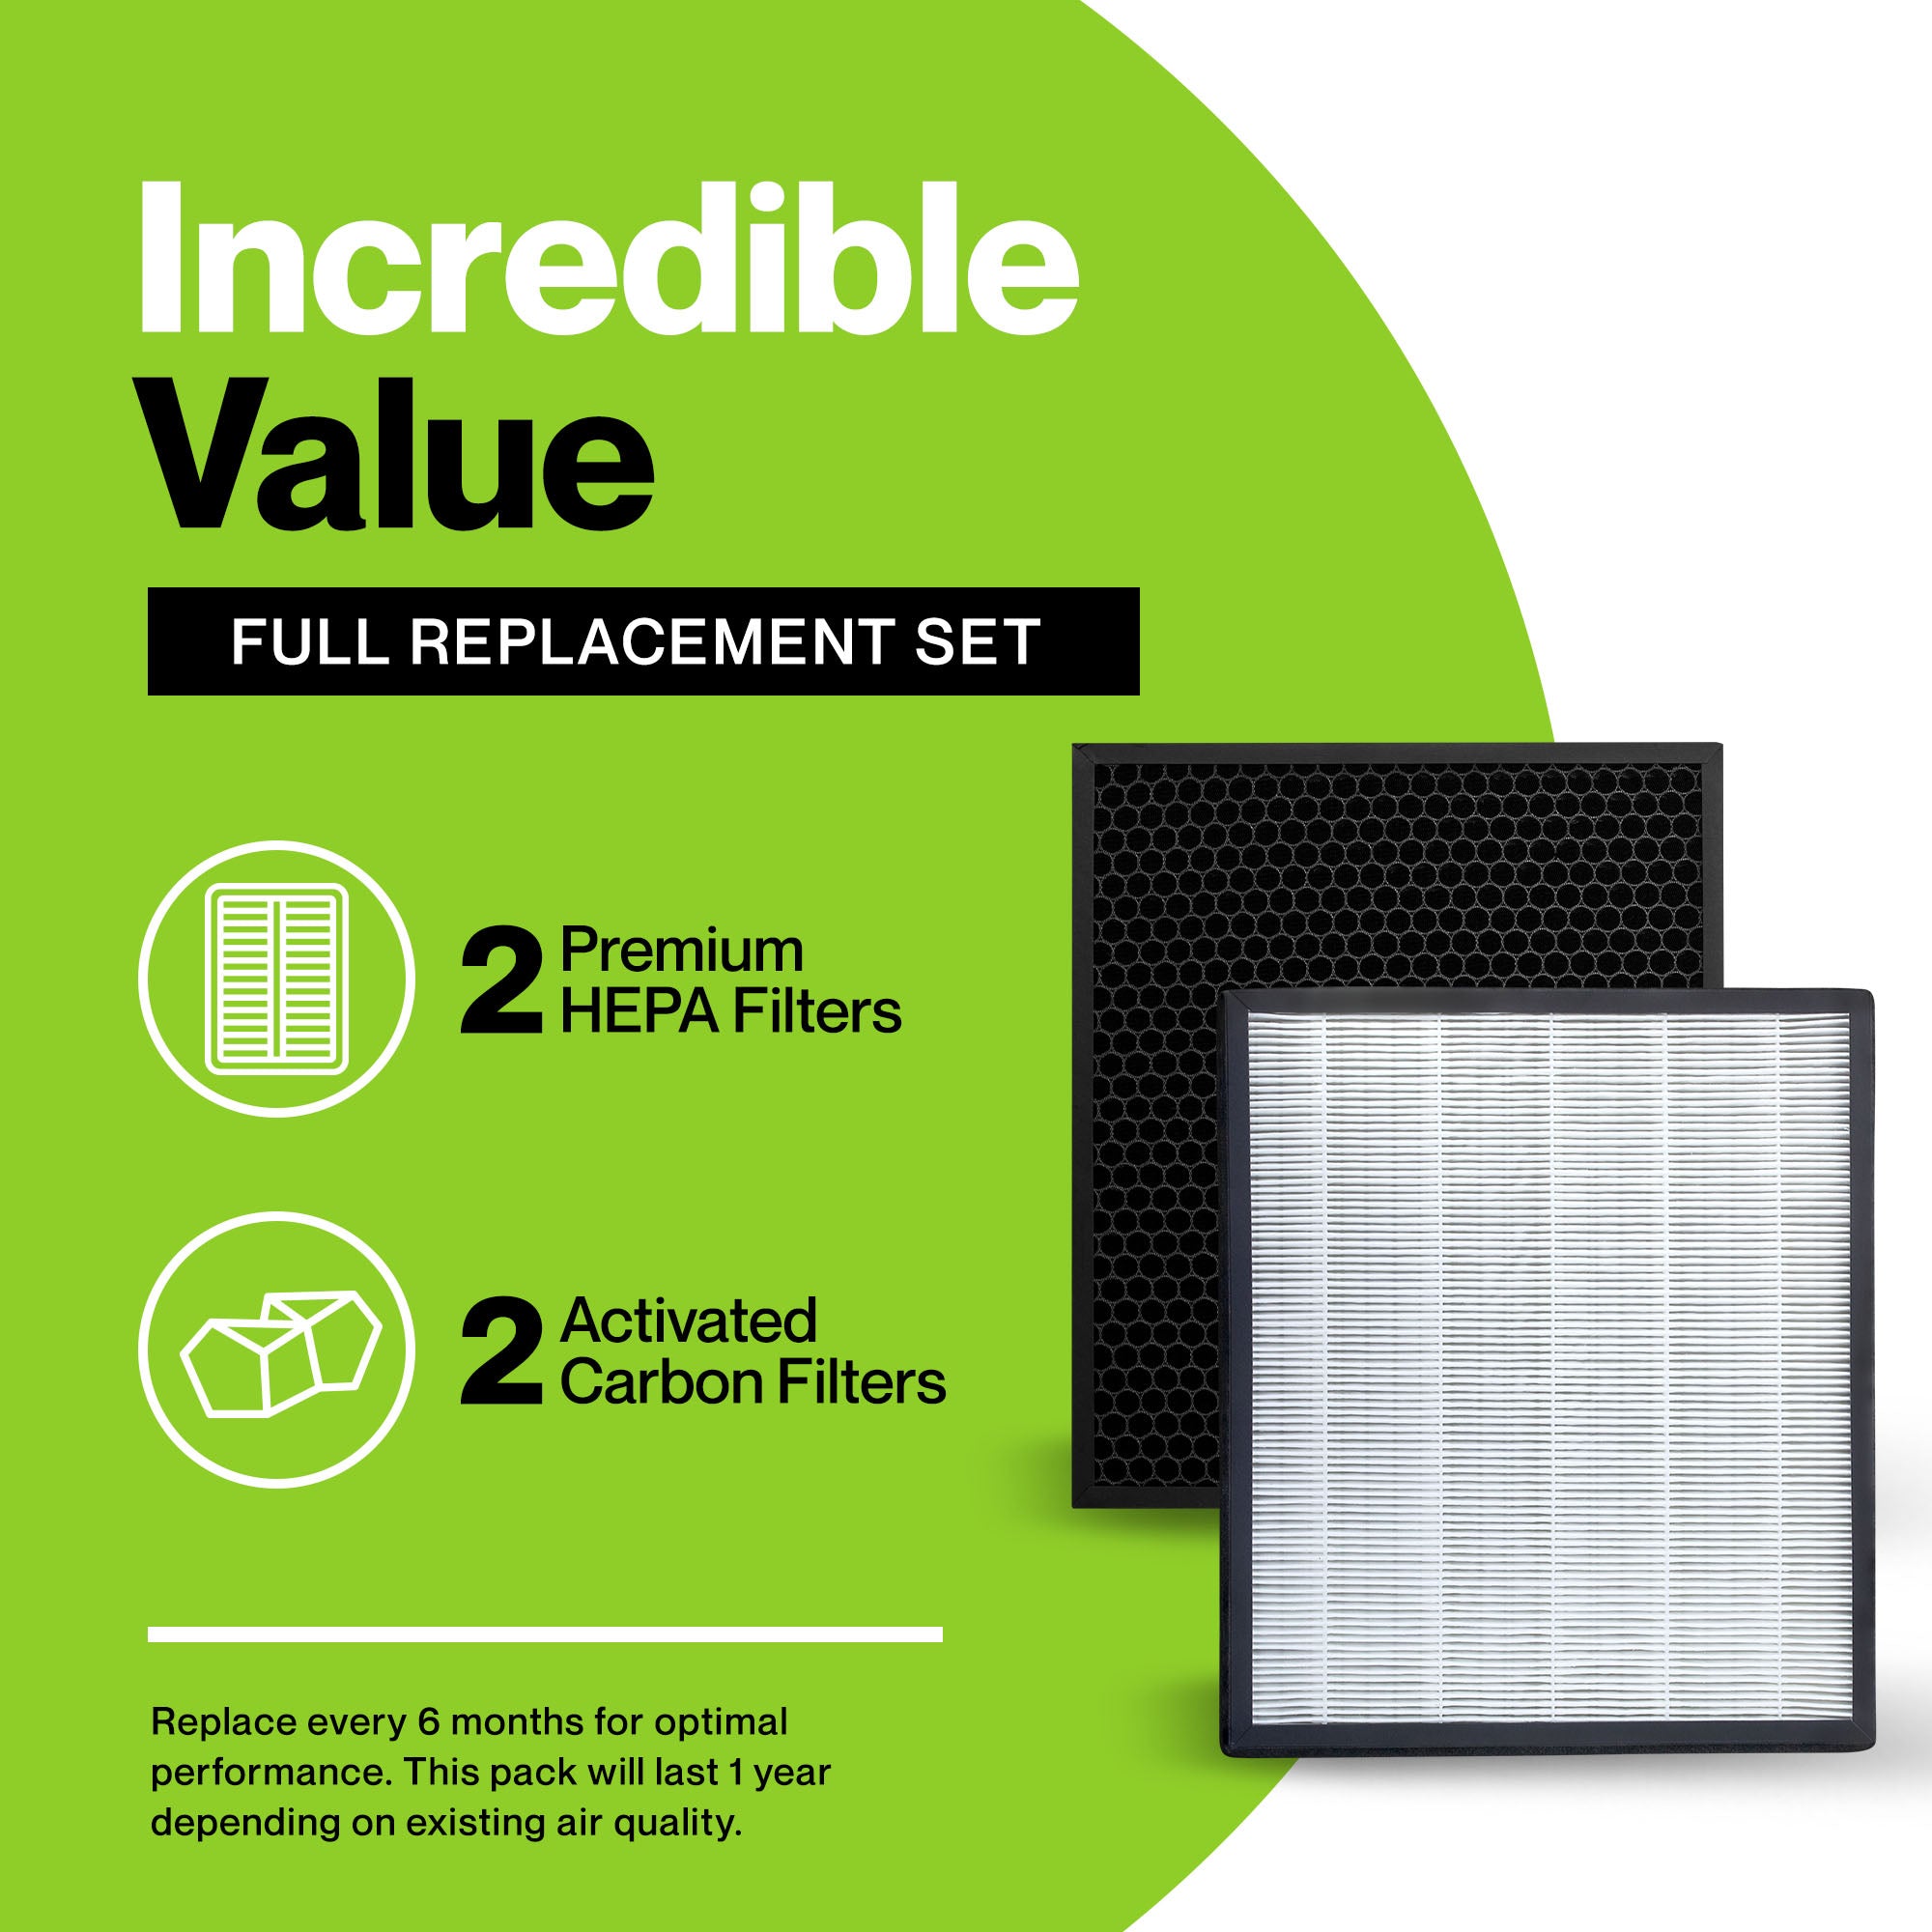 Atomic Compatible Replacement HEPA Filter for Levoit LV-H132-RF (2 Pac -  Atomic Filters